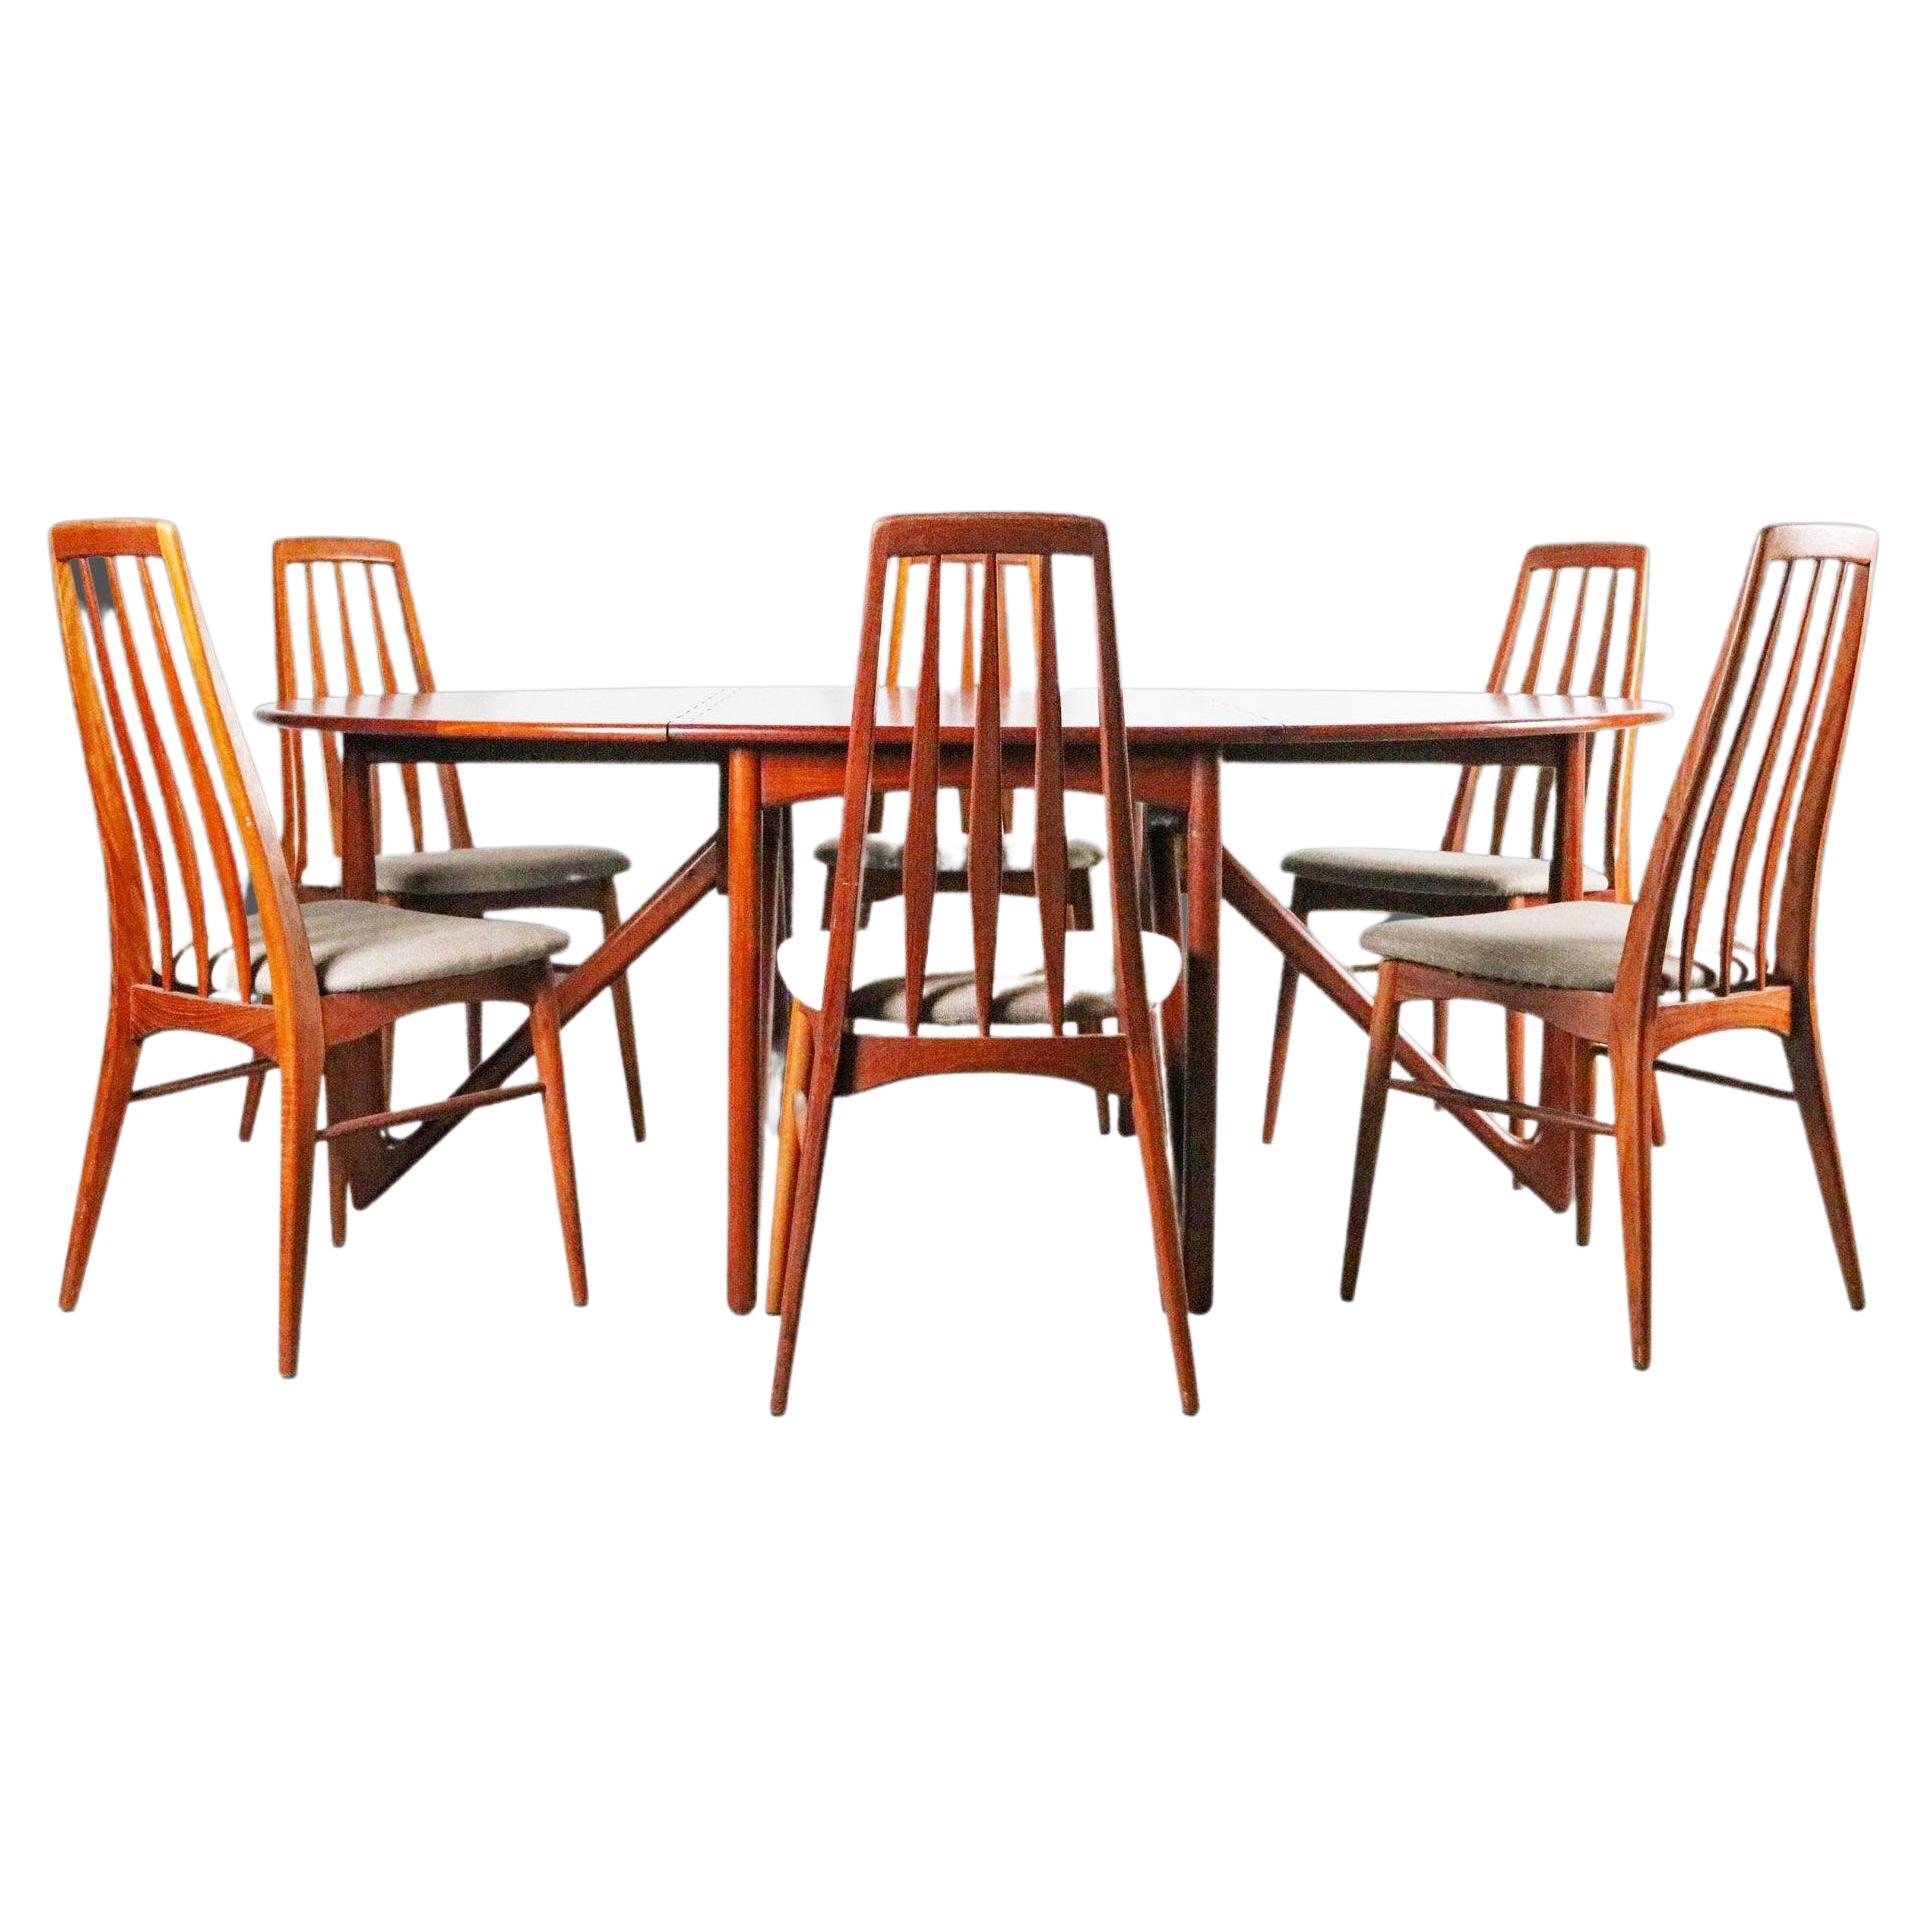 Constructed of solid teak this visually stunning dining table is the epitome of functional art. With exquisite dovetail joinery, exceptional teak hardwood and ingeniously-designed angular legs that swing outward to create a functional masterpiece